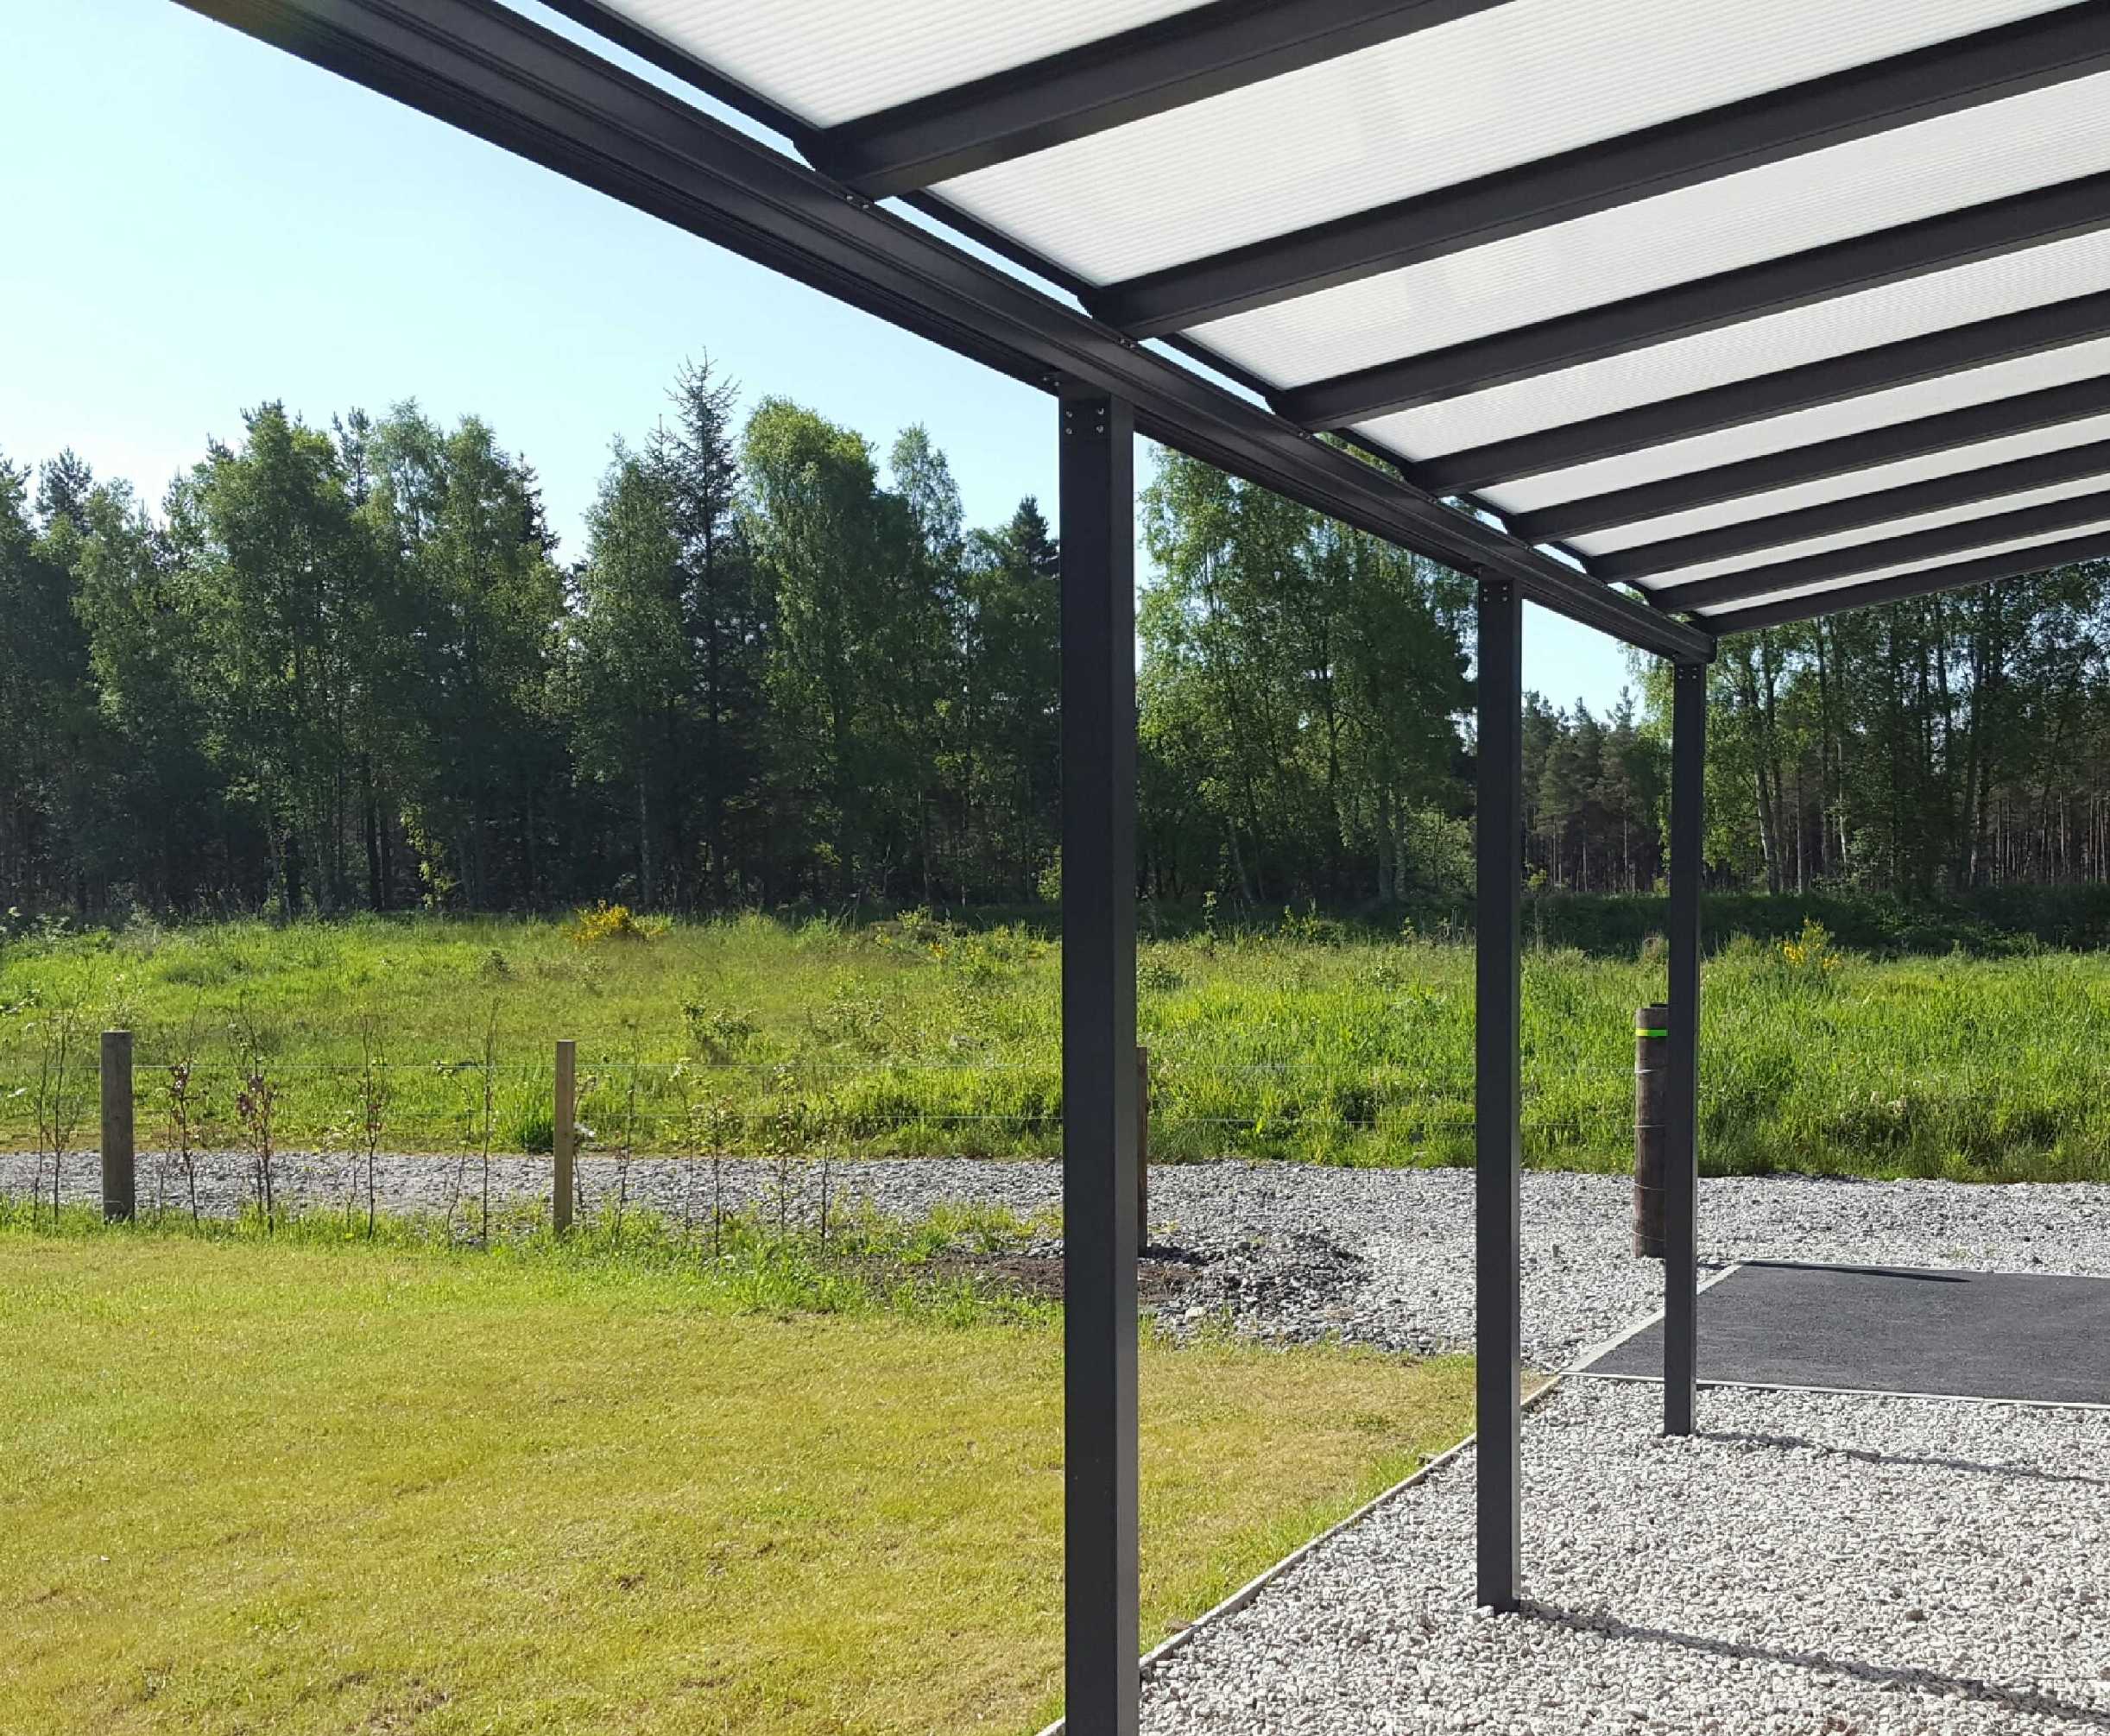 Omega Smart Lean-To Canopy, Anthracite Grey, 6mm Glass Clear Plate Polycarbonate Glazing - 7.7m (W) x 2.5m (P), (4) Supporting Posts